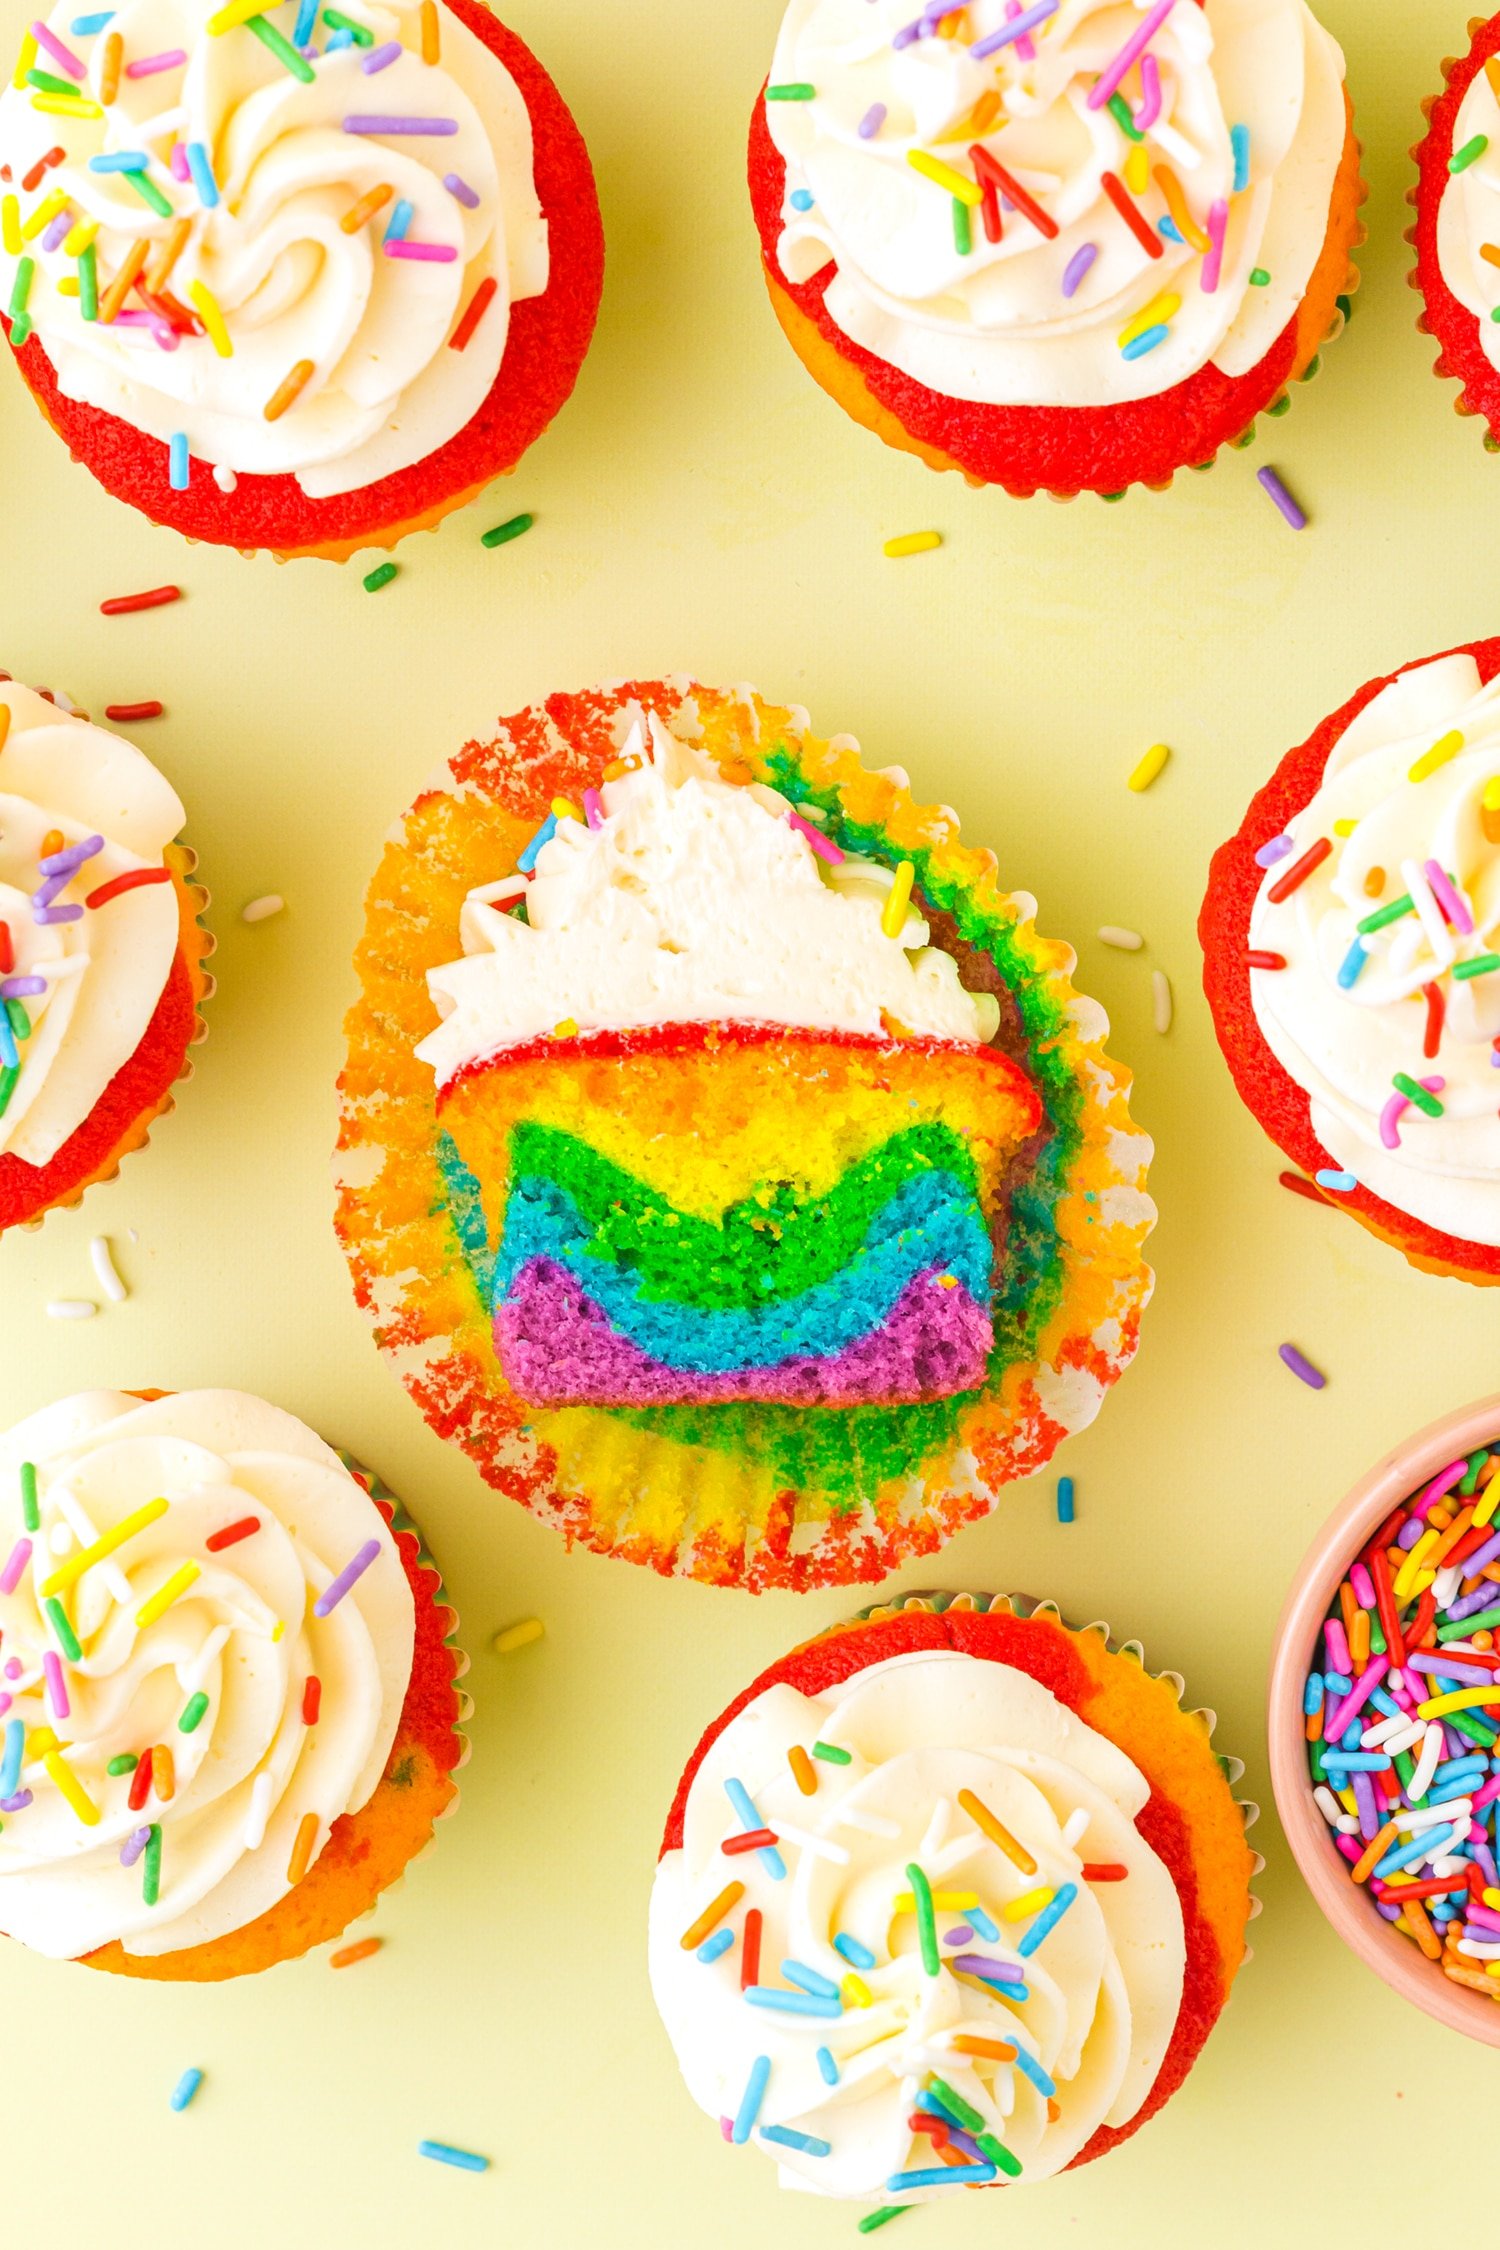 Rainbow Cupcake cut in half on a yellow background